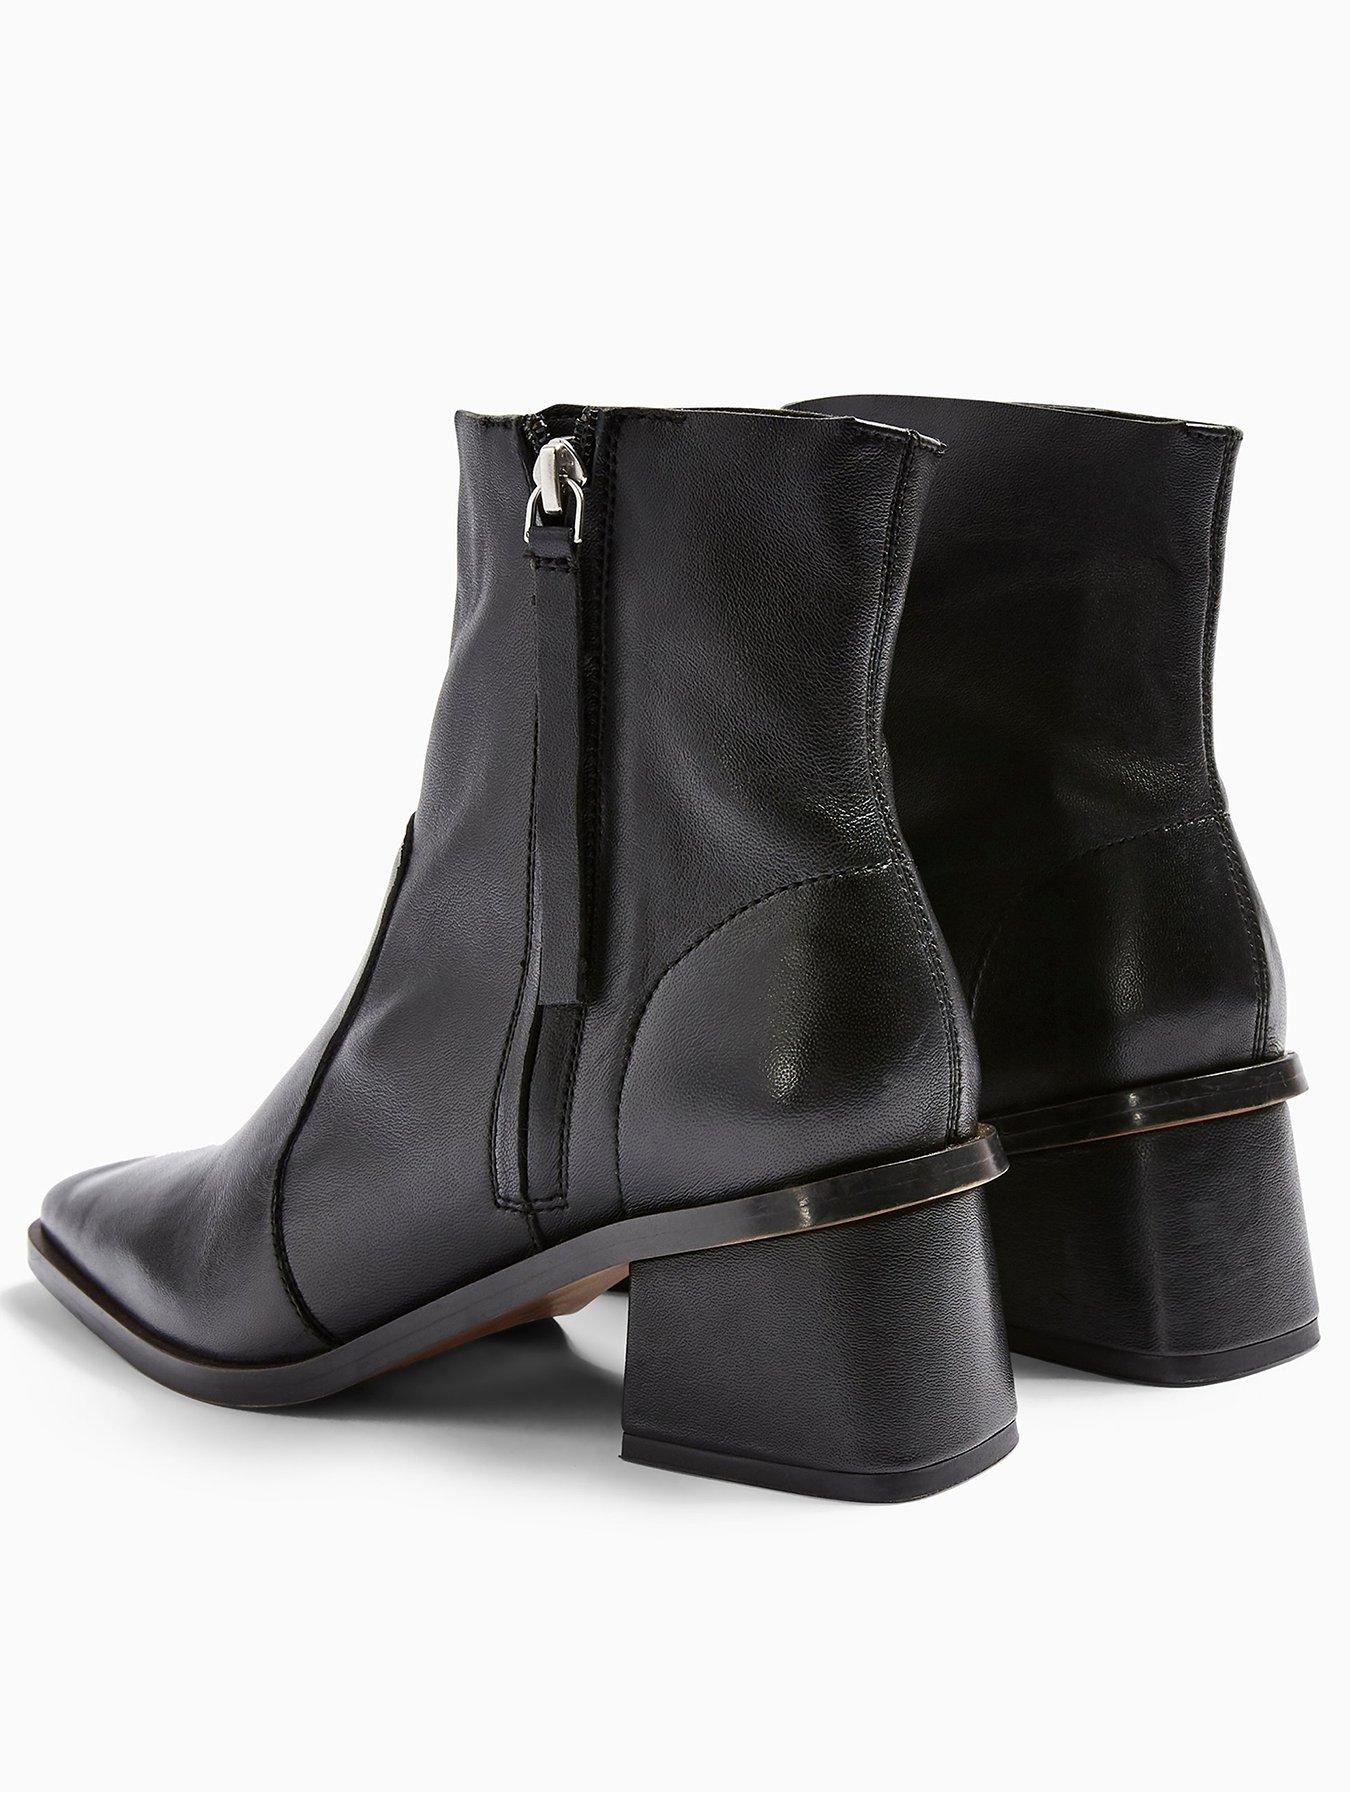 topshop ankle boots uk